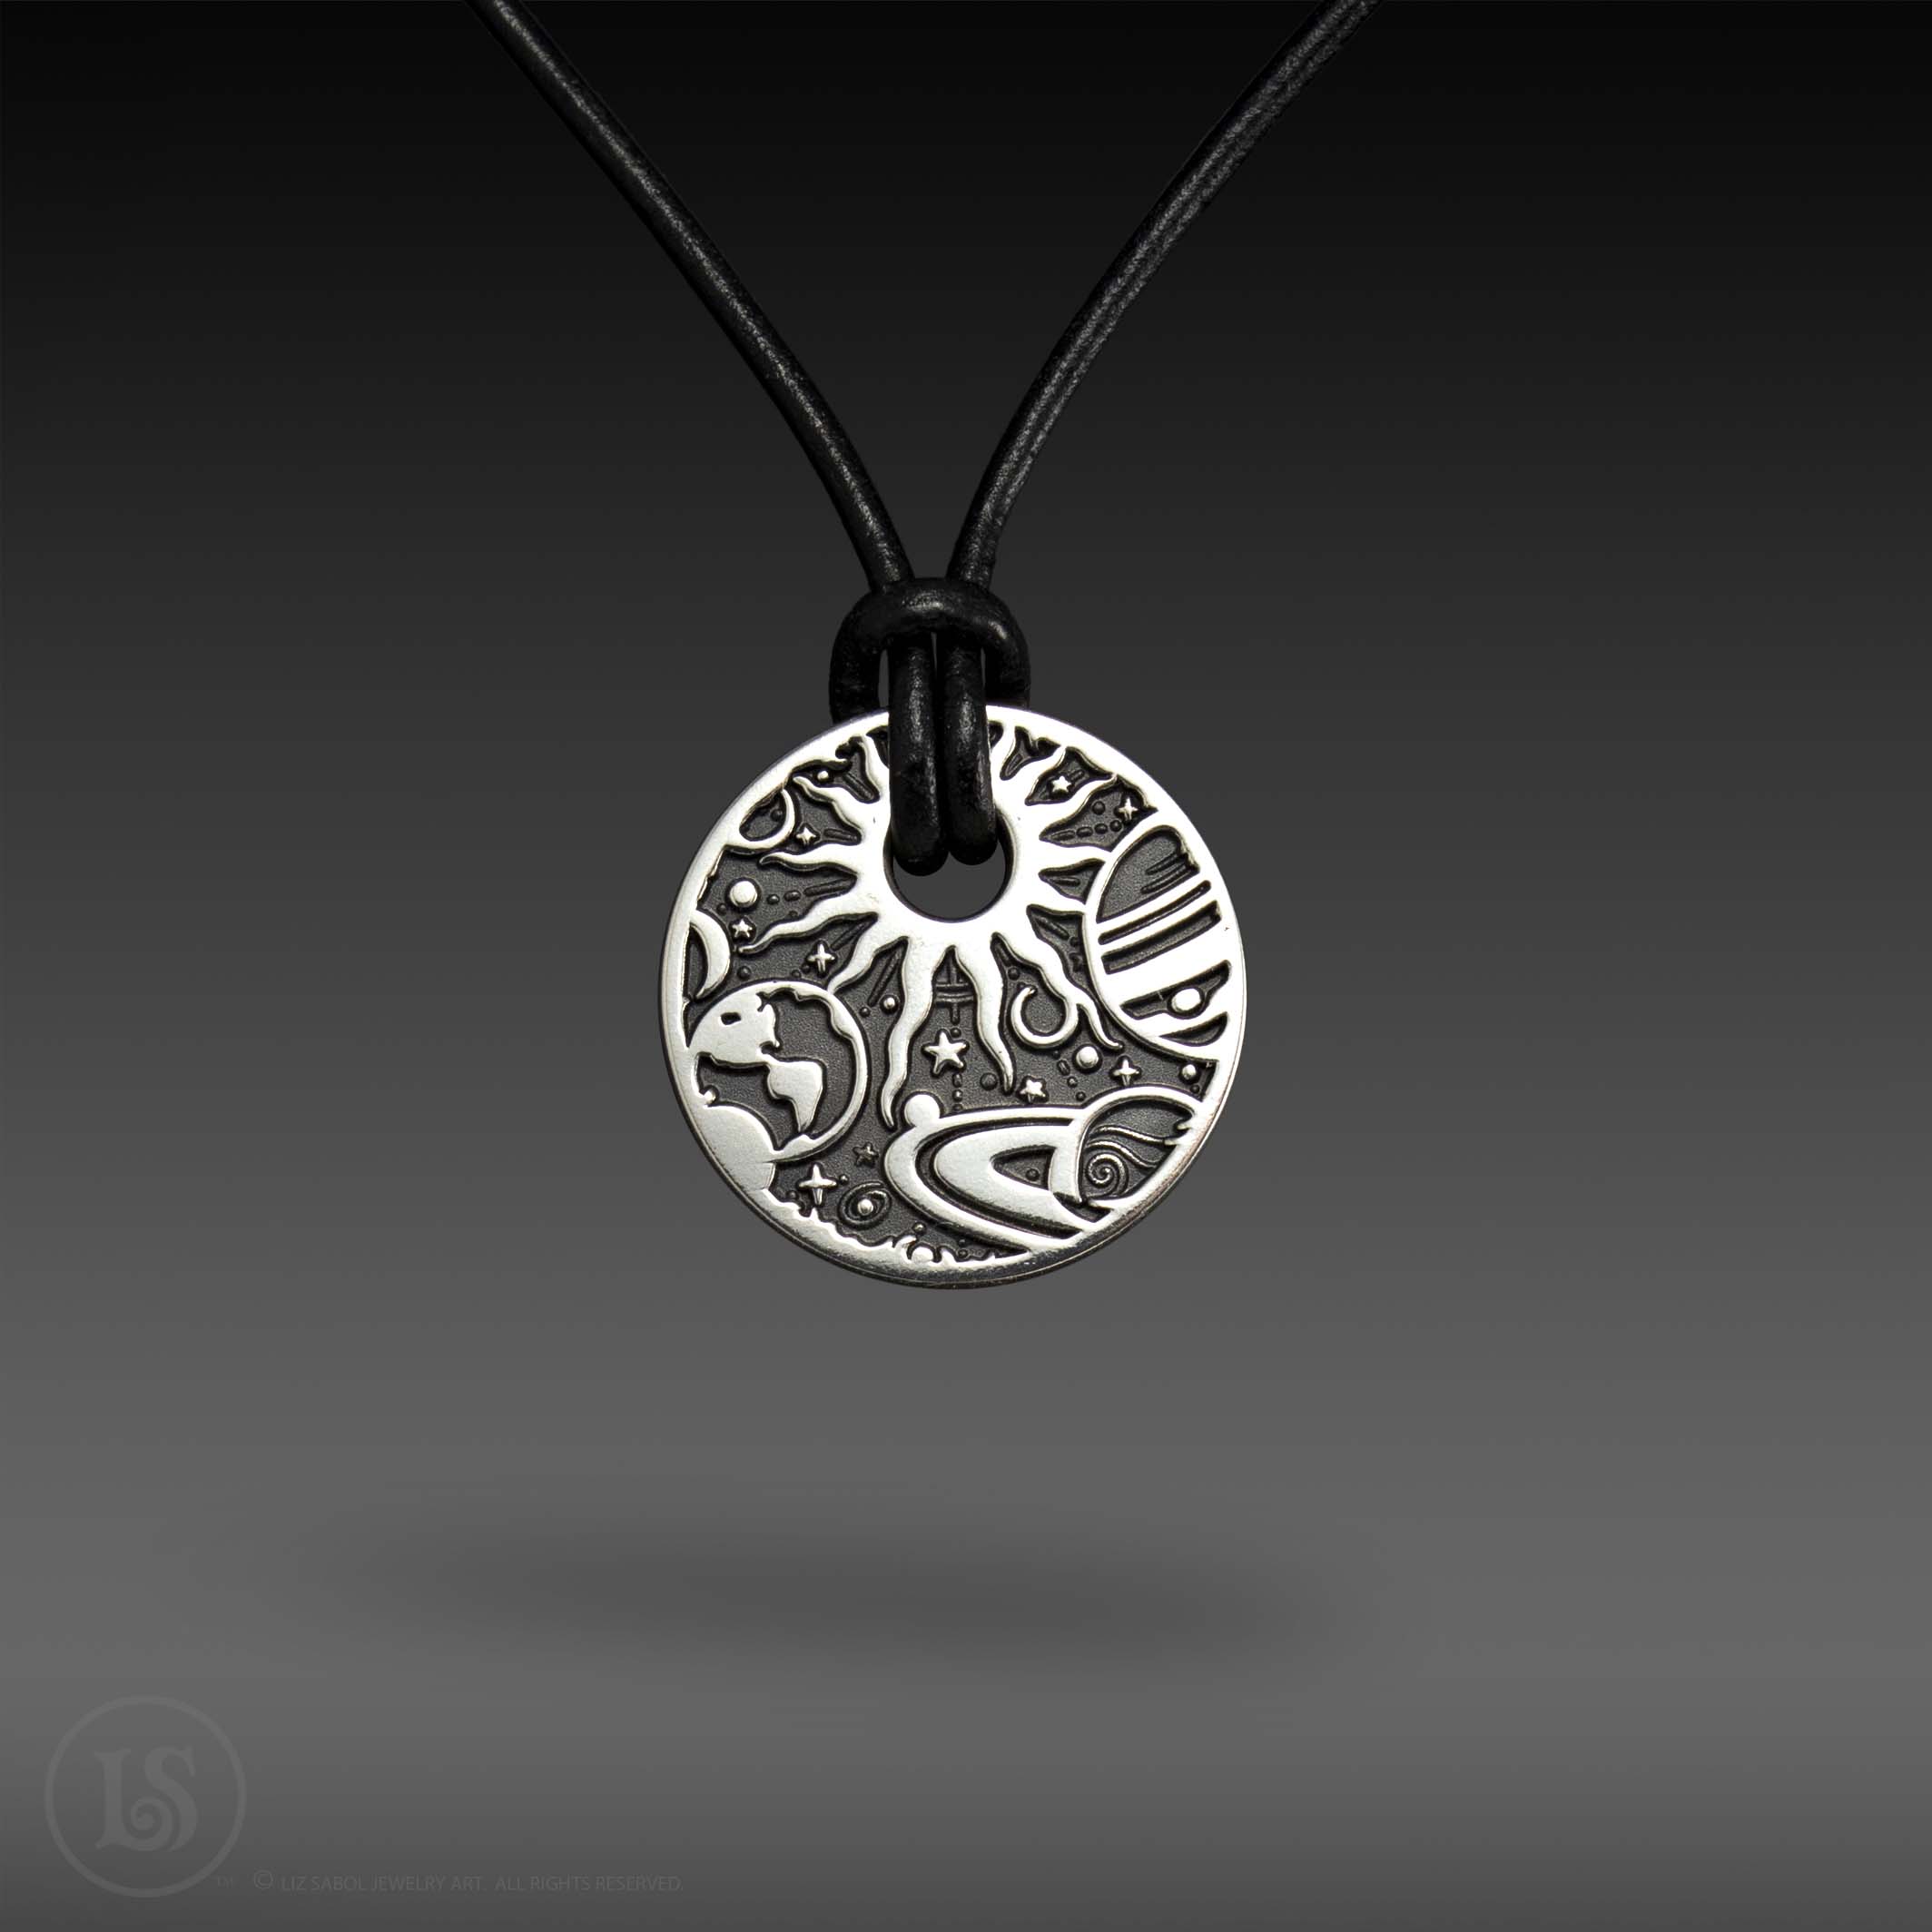 Solar System Black, Small Pendant, Sterling Silver